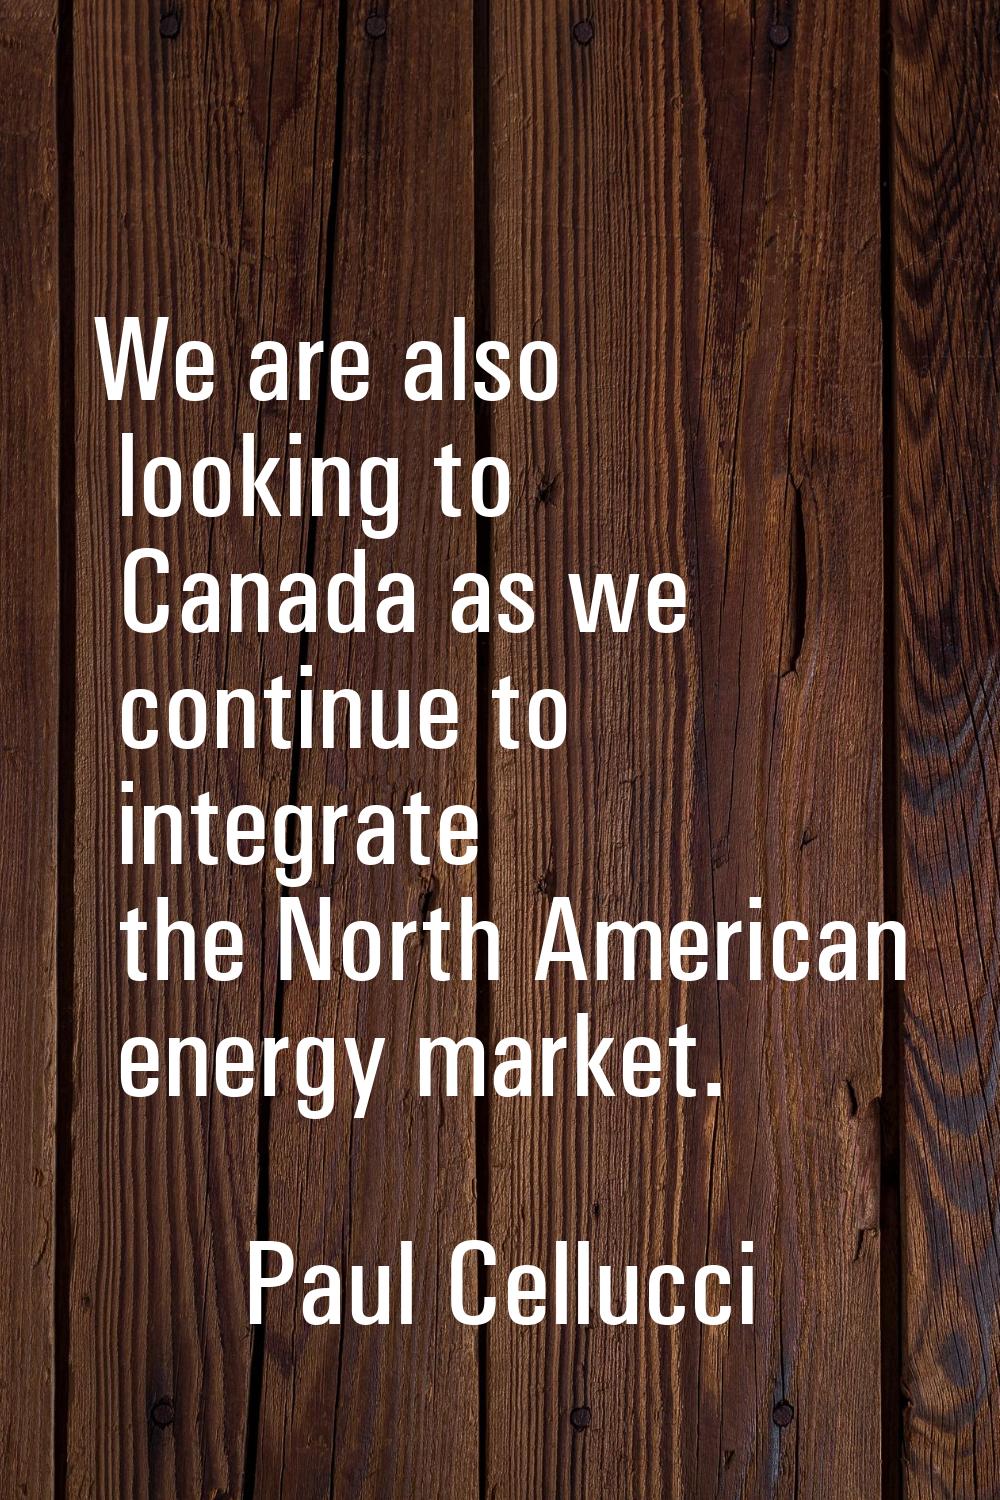 We are also looking to Canada as we continue to integrate the North American energy market.